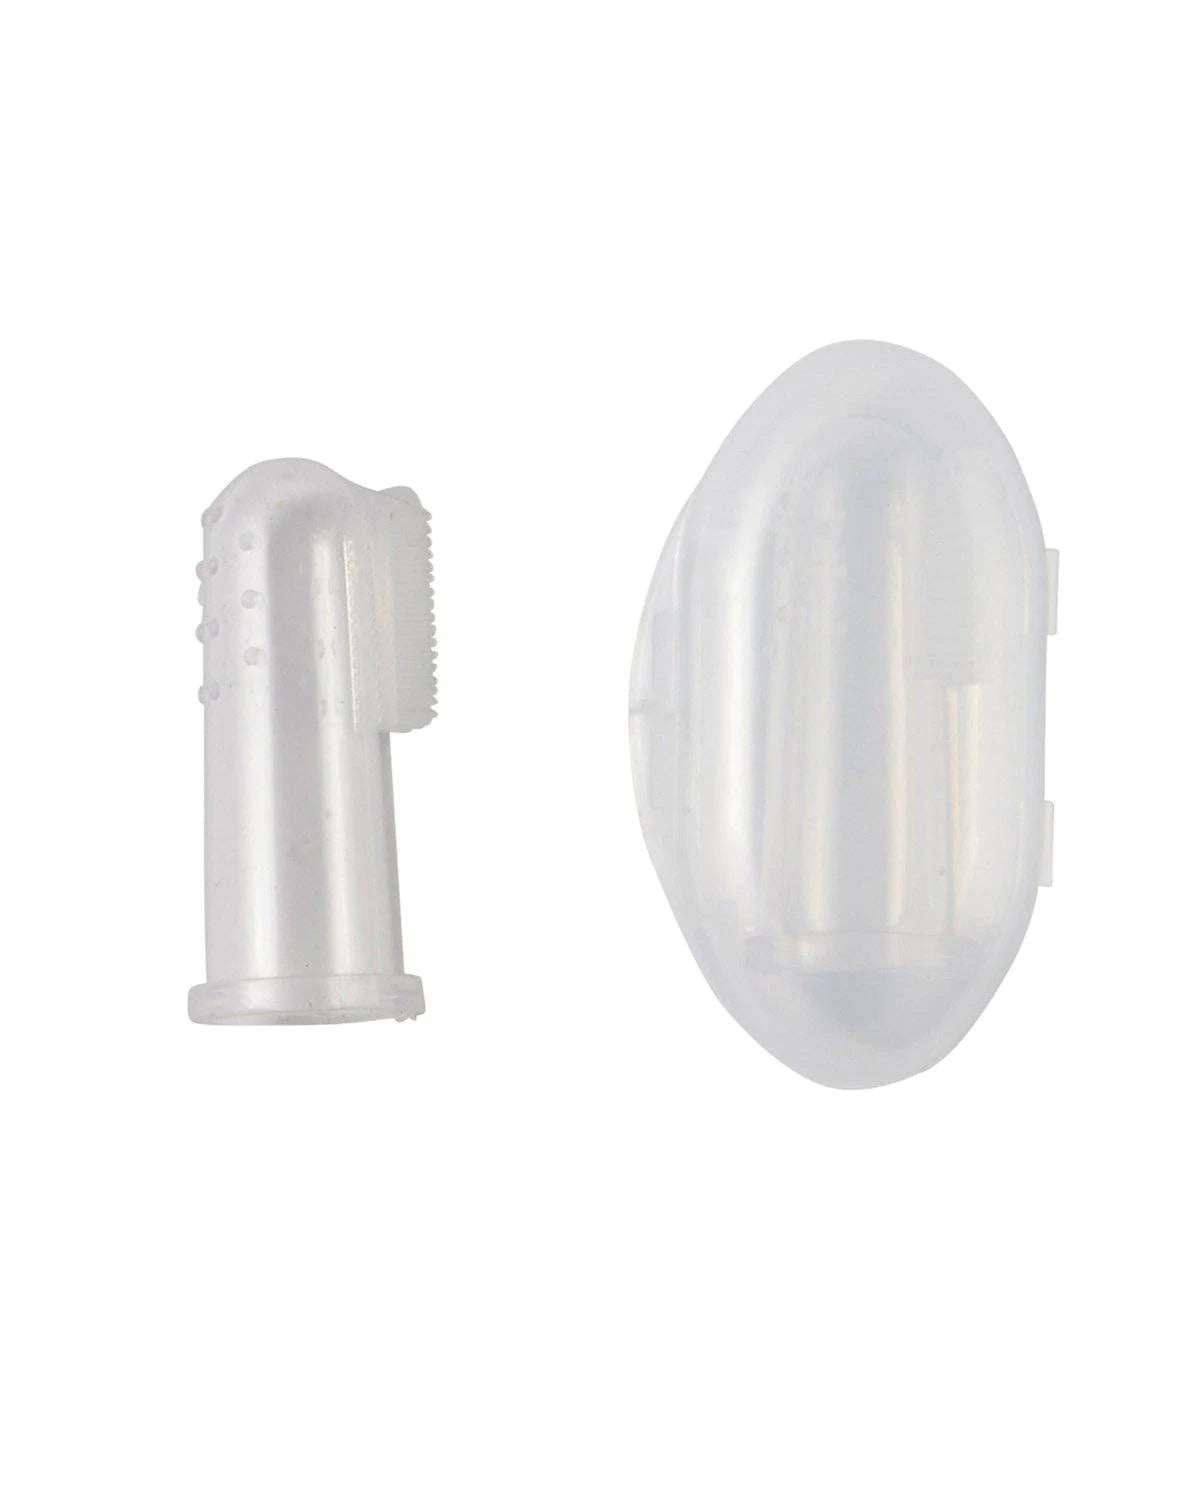 Jack N' Jill Silicone Finger Brush Stage 1 - 2 Pack